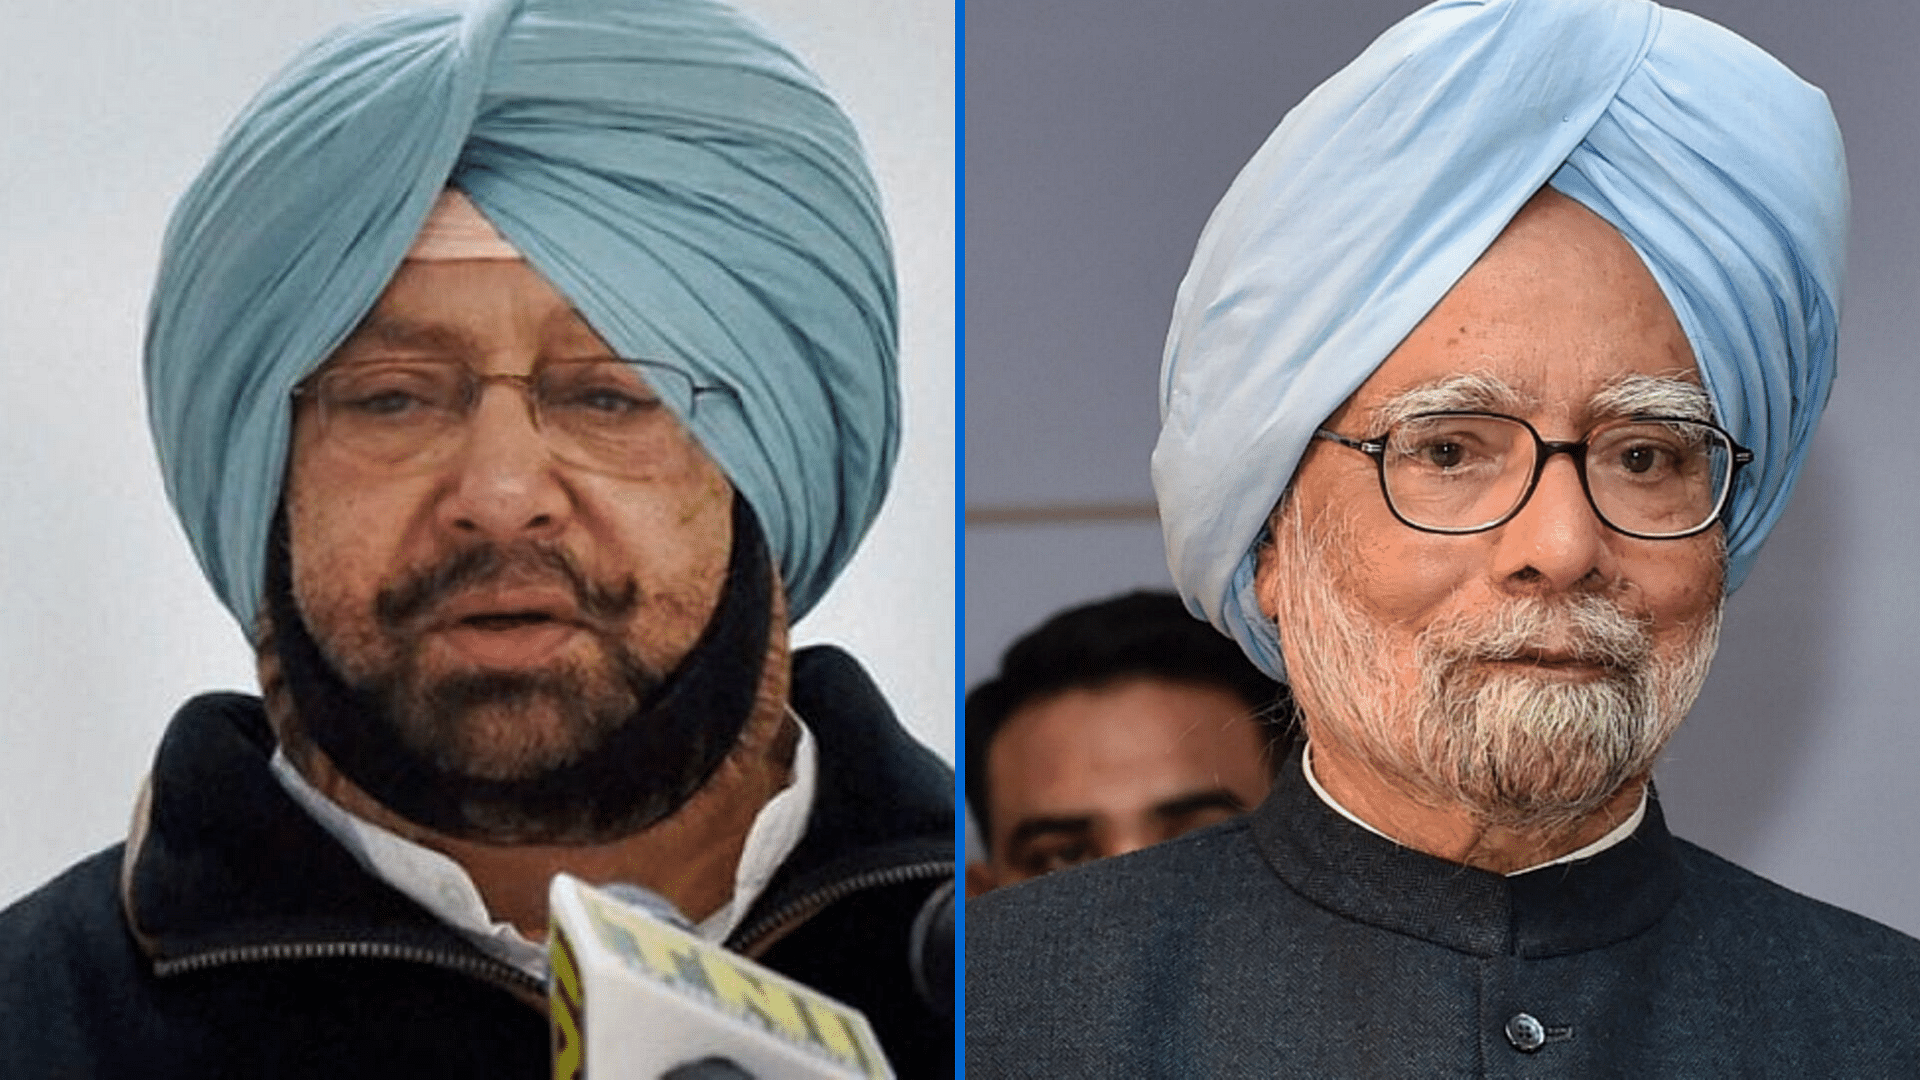 Ex-Prime Minister Manmohan Singh earlier had reportedly accepted Punjab Chief Minister Captain Amarinder Singh’s invite to visit Kartarpur Sahib.